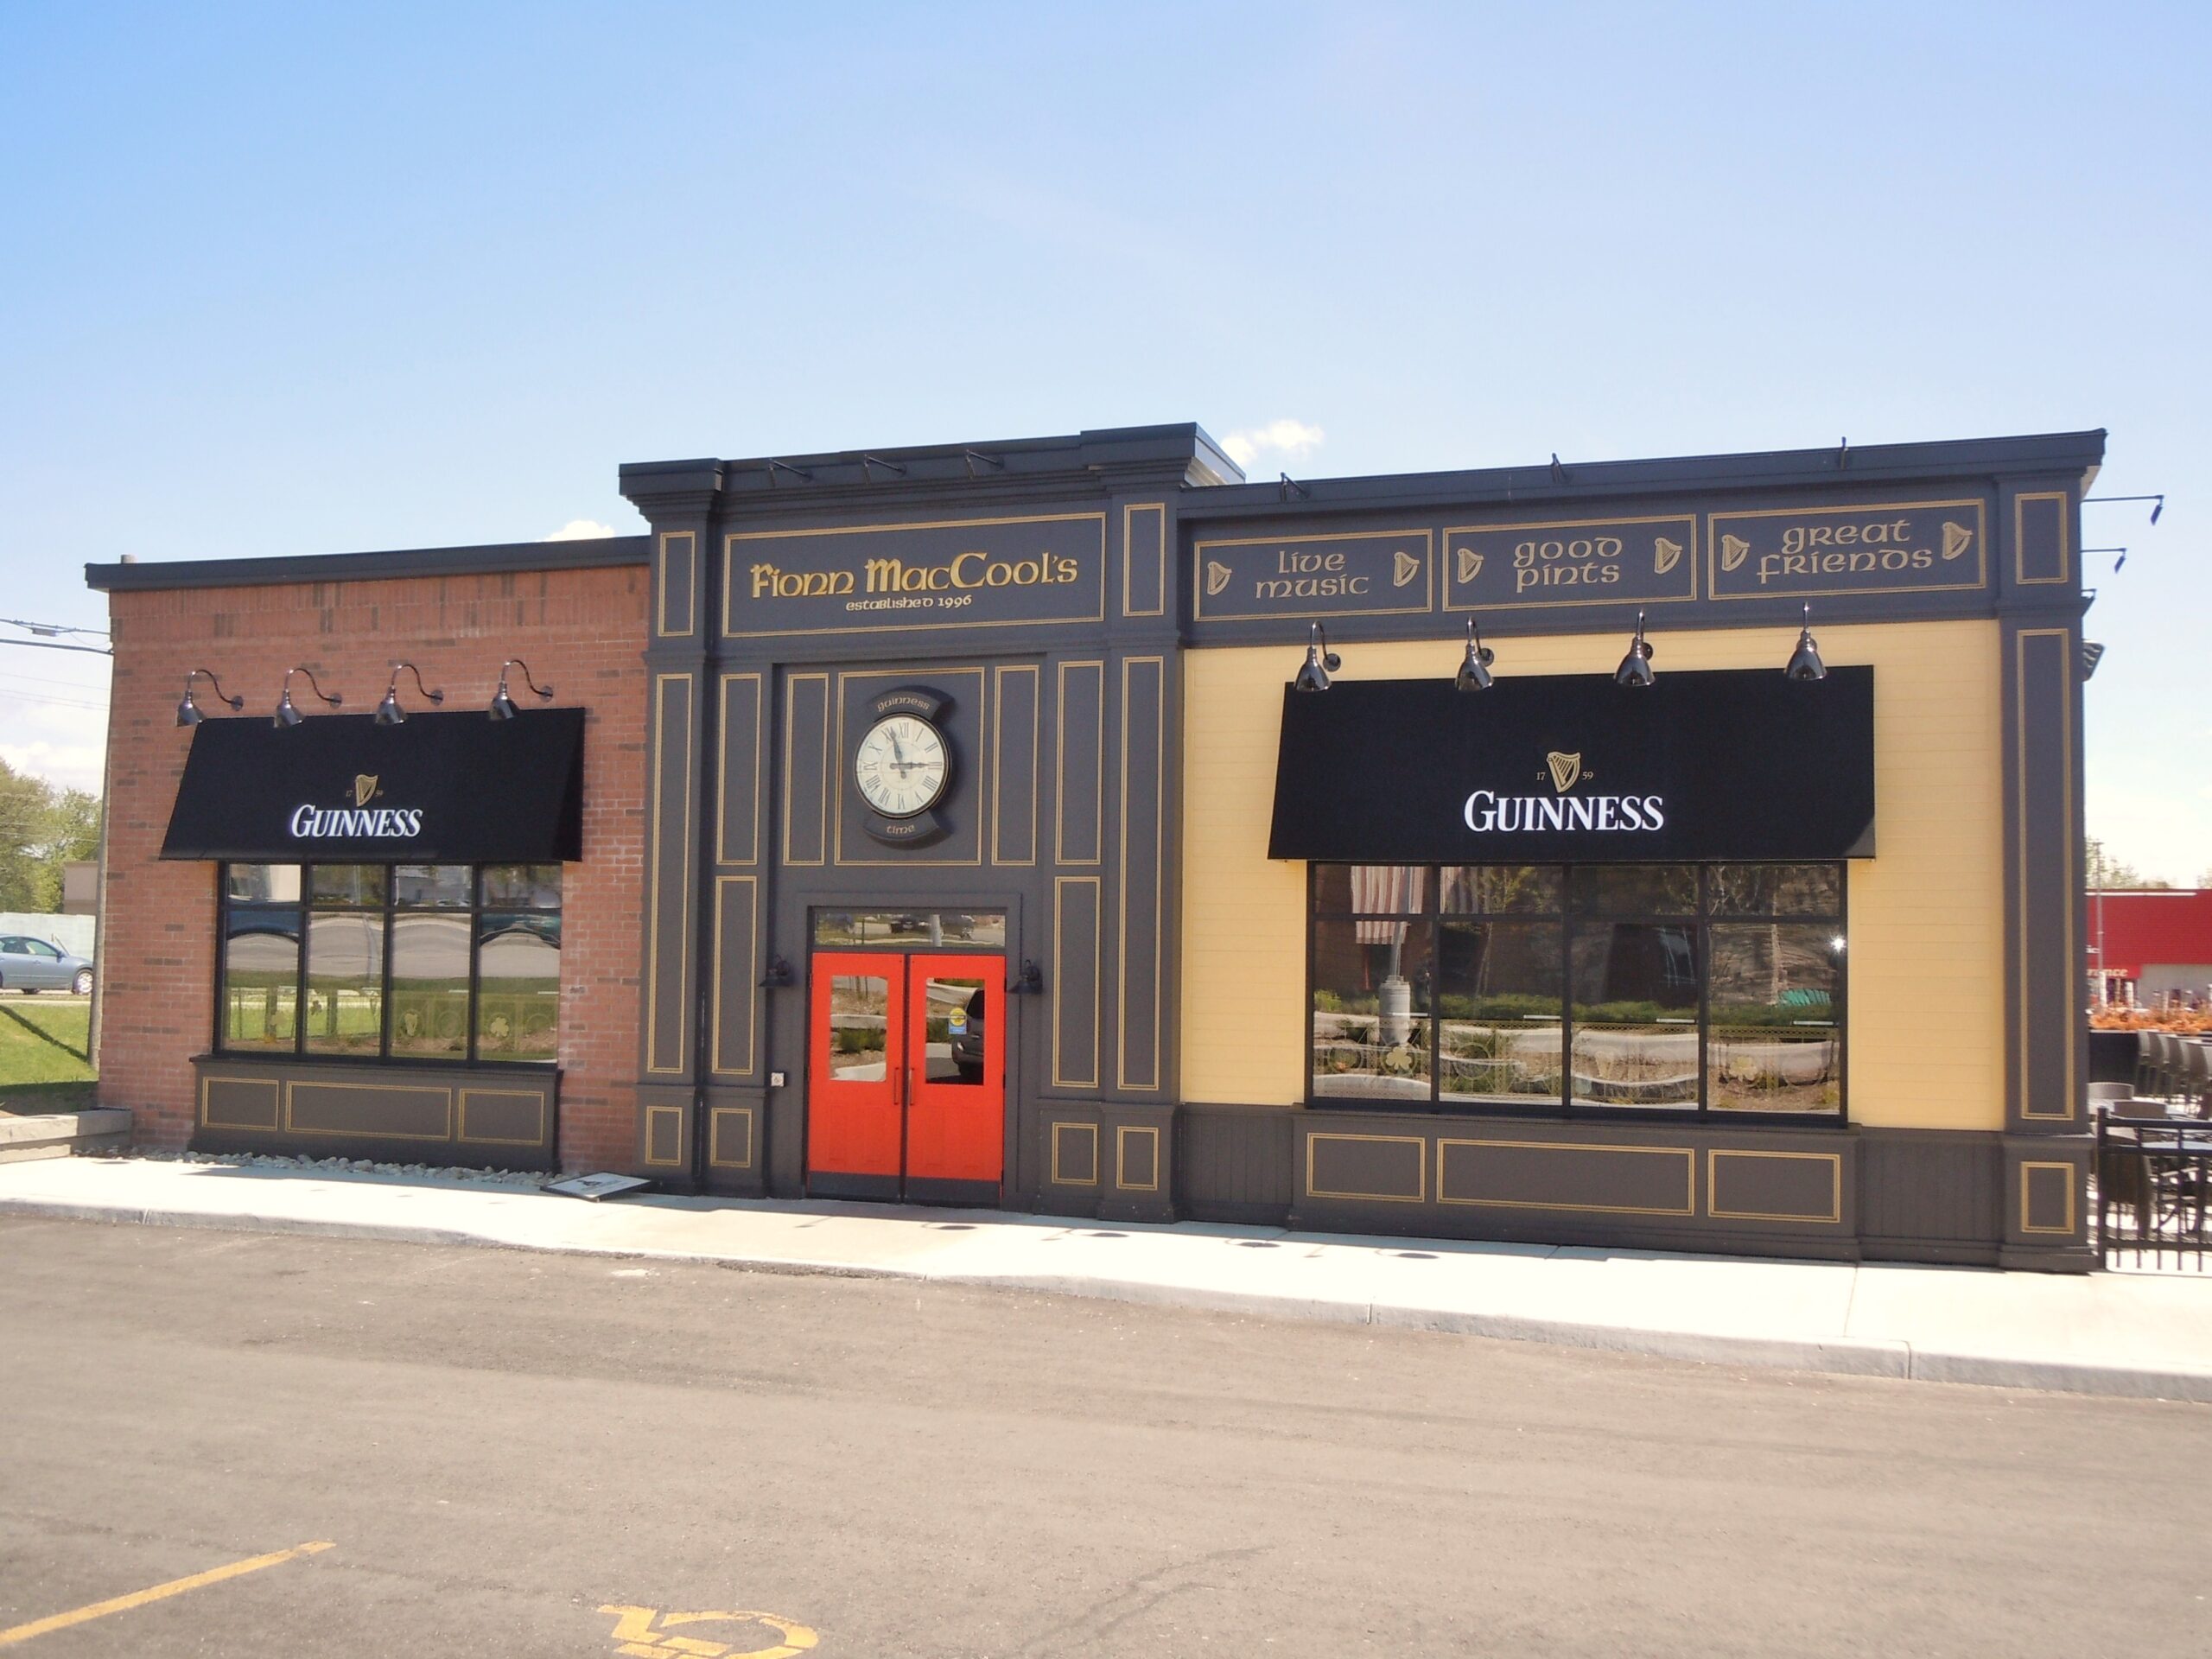 4287 King Street East, Kitchener | Free Standing Retail Space Available for Lease